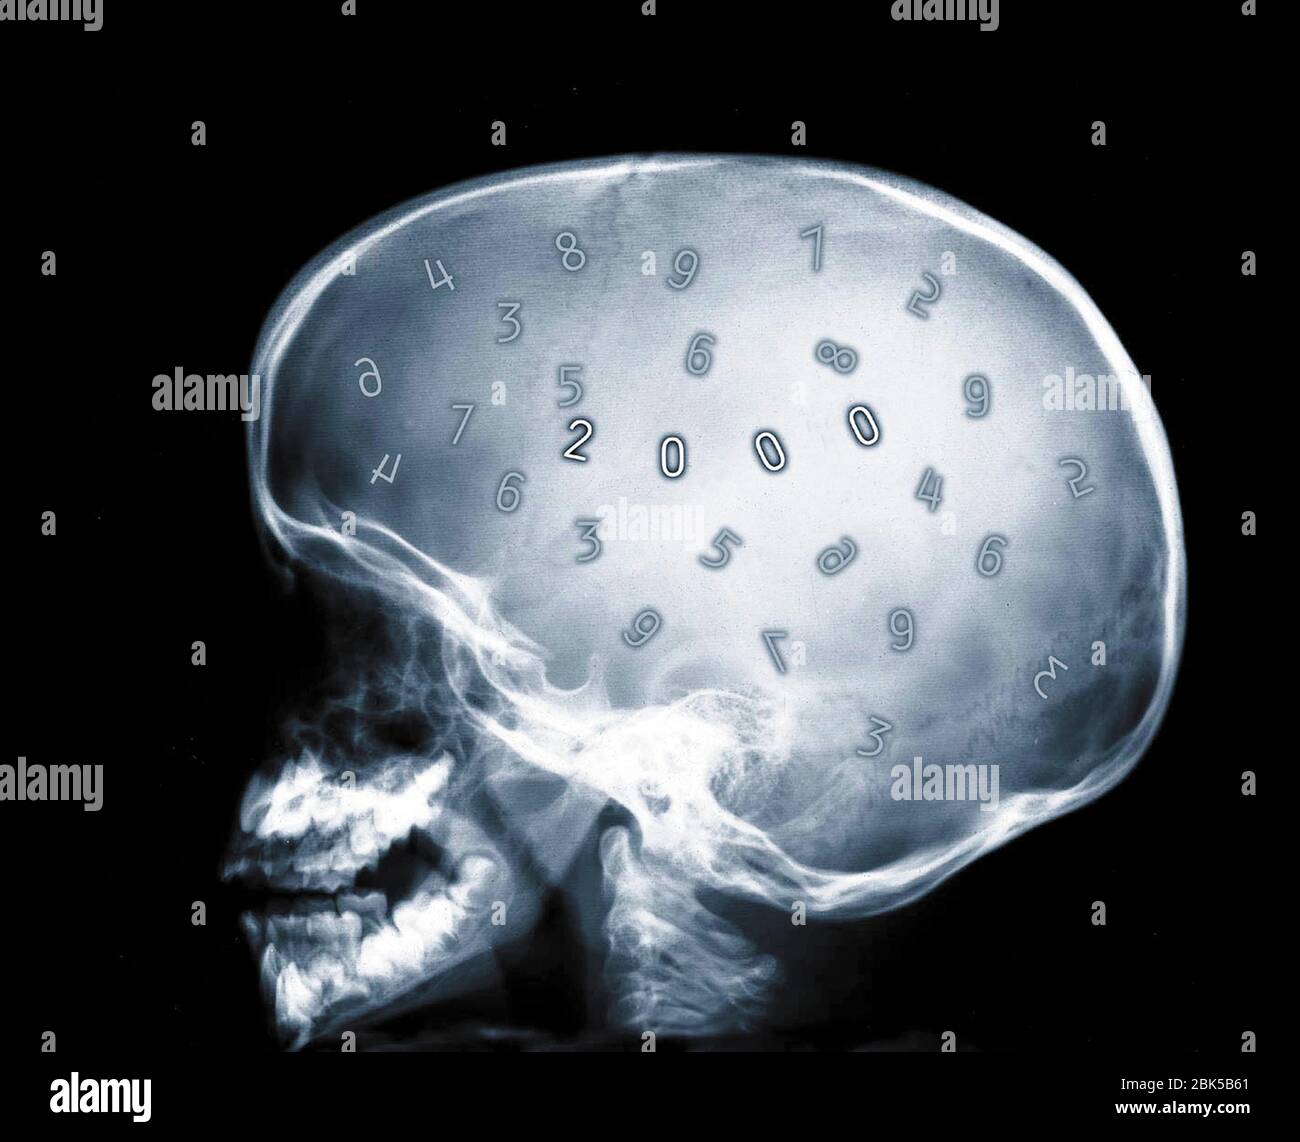 Human skull and numbers, X-ray. Stock Photo